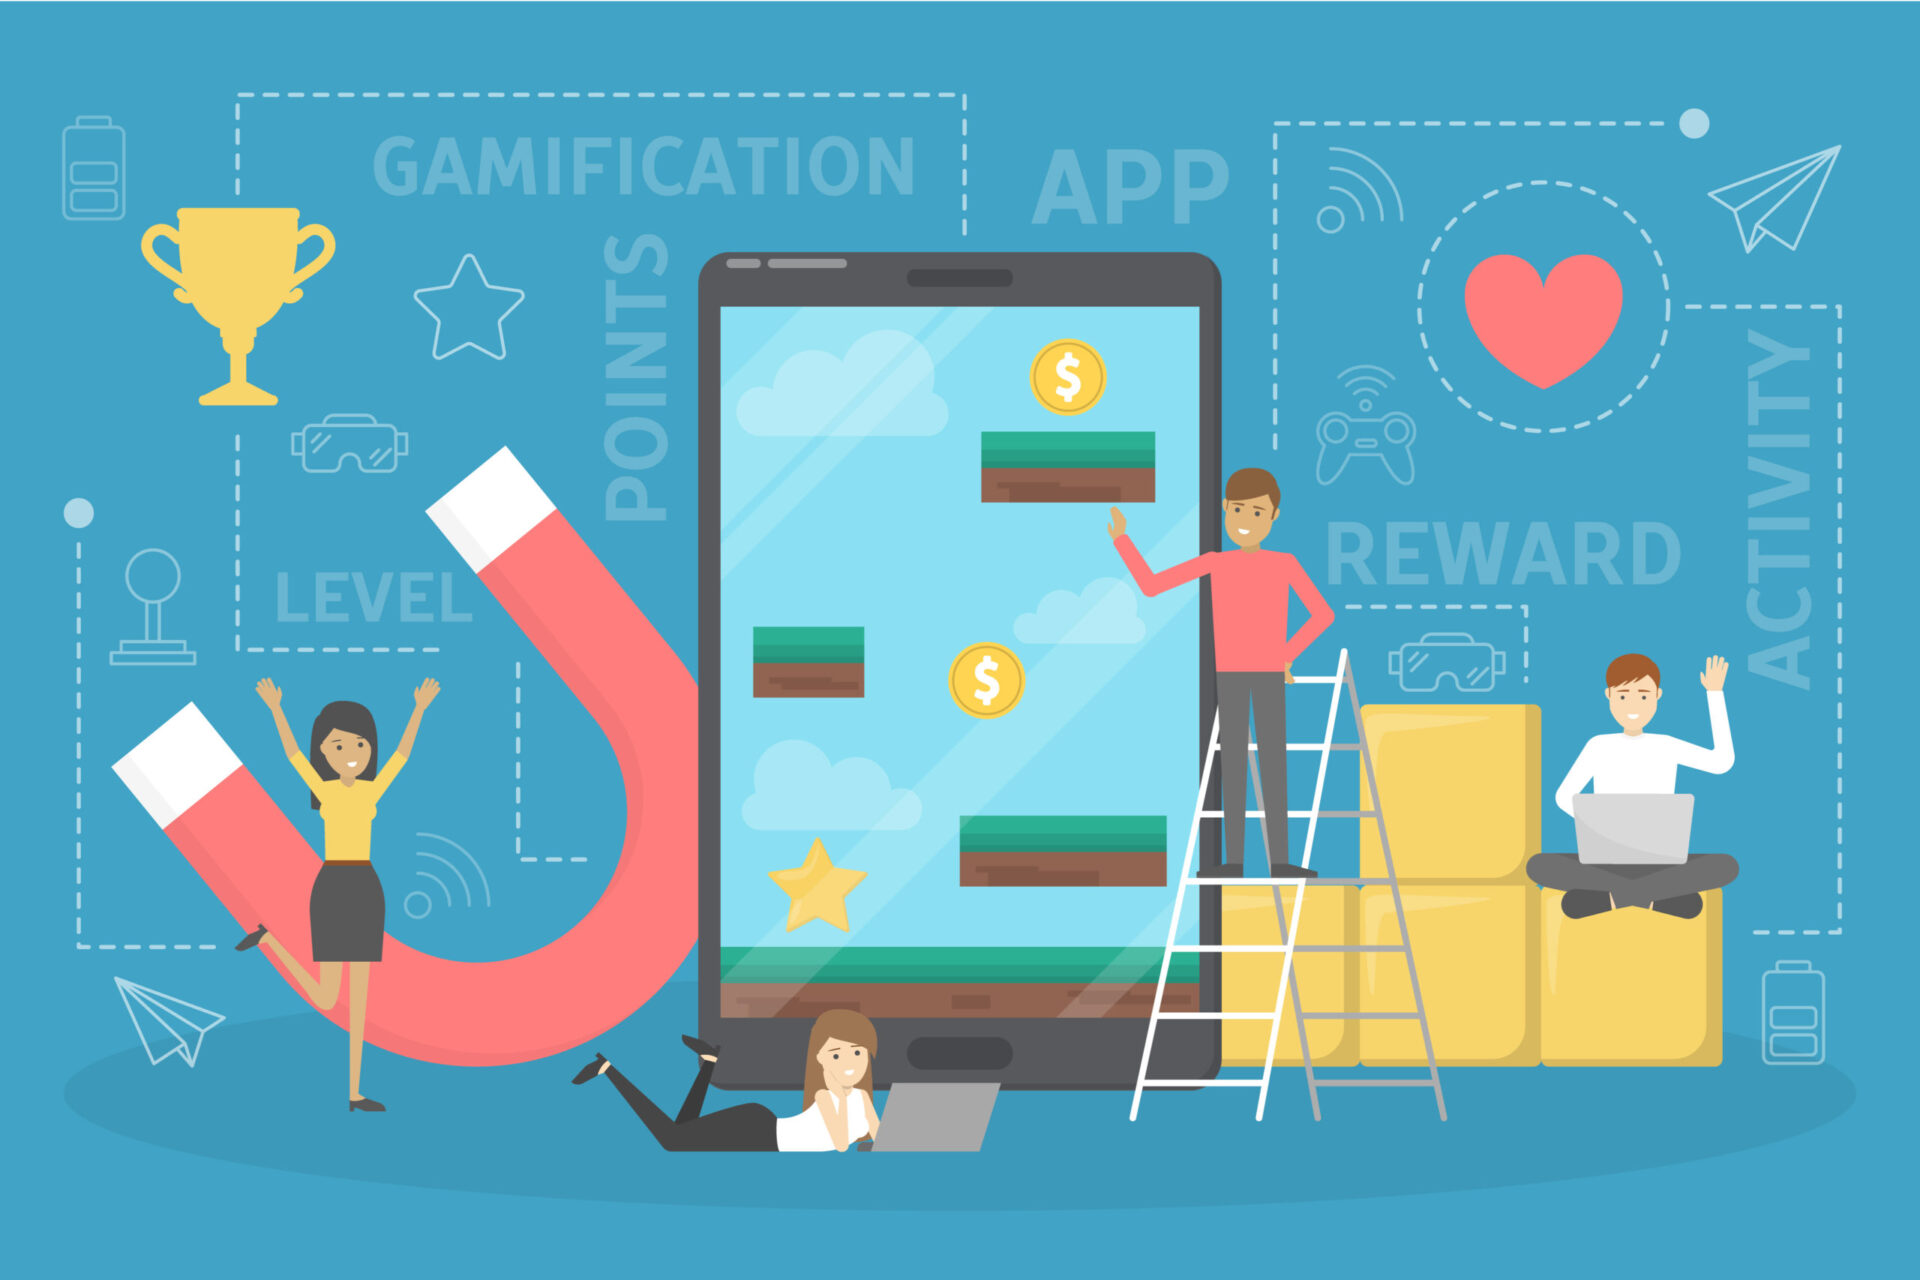 Gamification: How to Match your Organizational Goals to an Employee’s Personal Goals